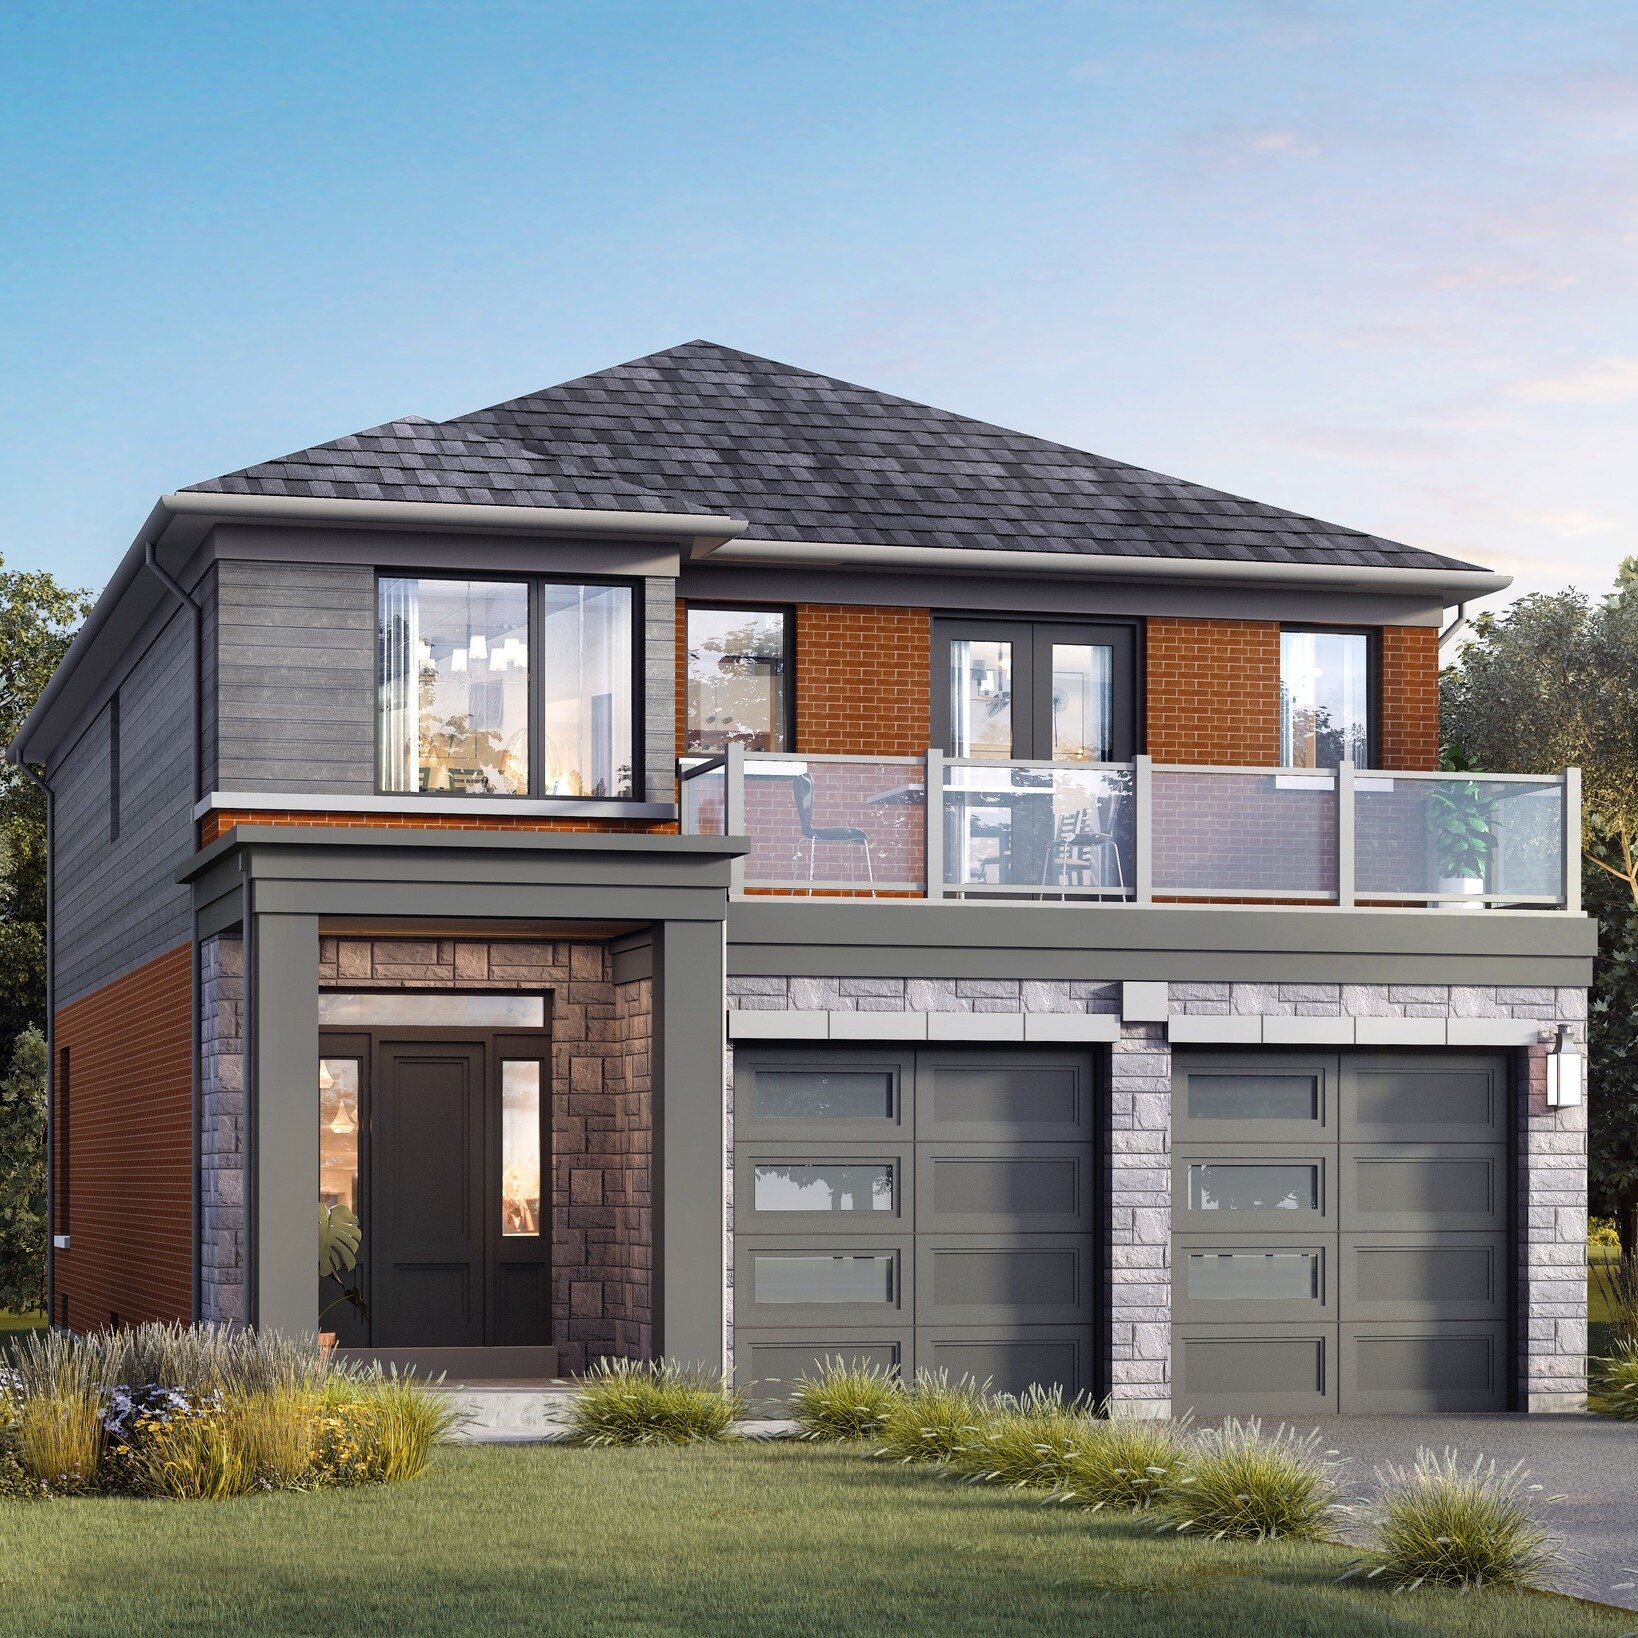 New subdivision of 2 &amp; 3 storey detached homes available now in Oshawa. Model Home Coming Soon! 🏠

#hollandhomes #newdevelopment #forsale #availablenow #gta #gtarealestate #realestate #modelhome #homegoals #durham